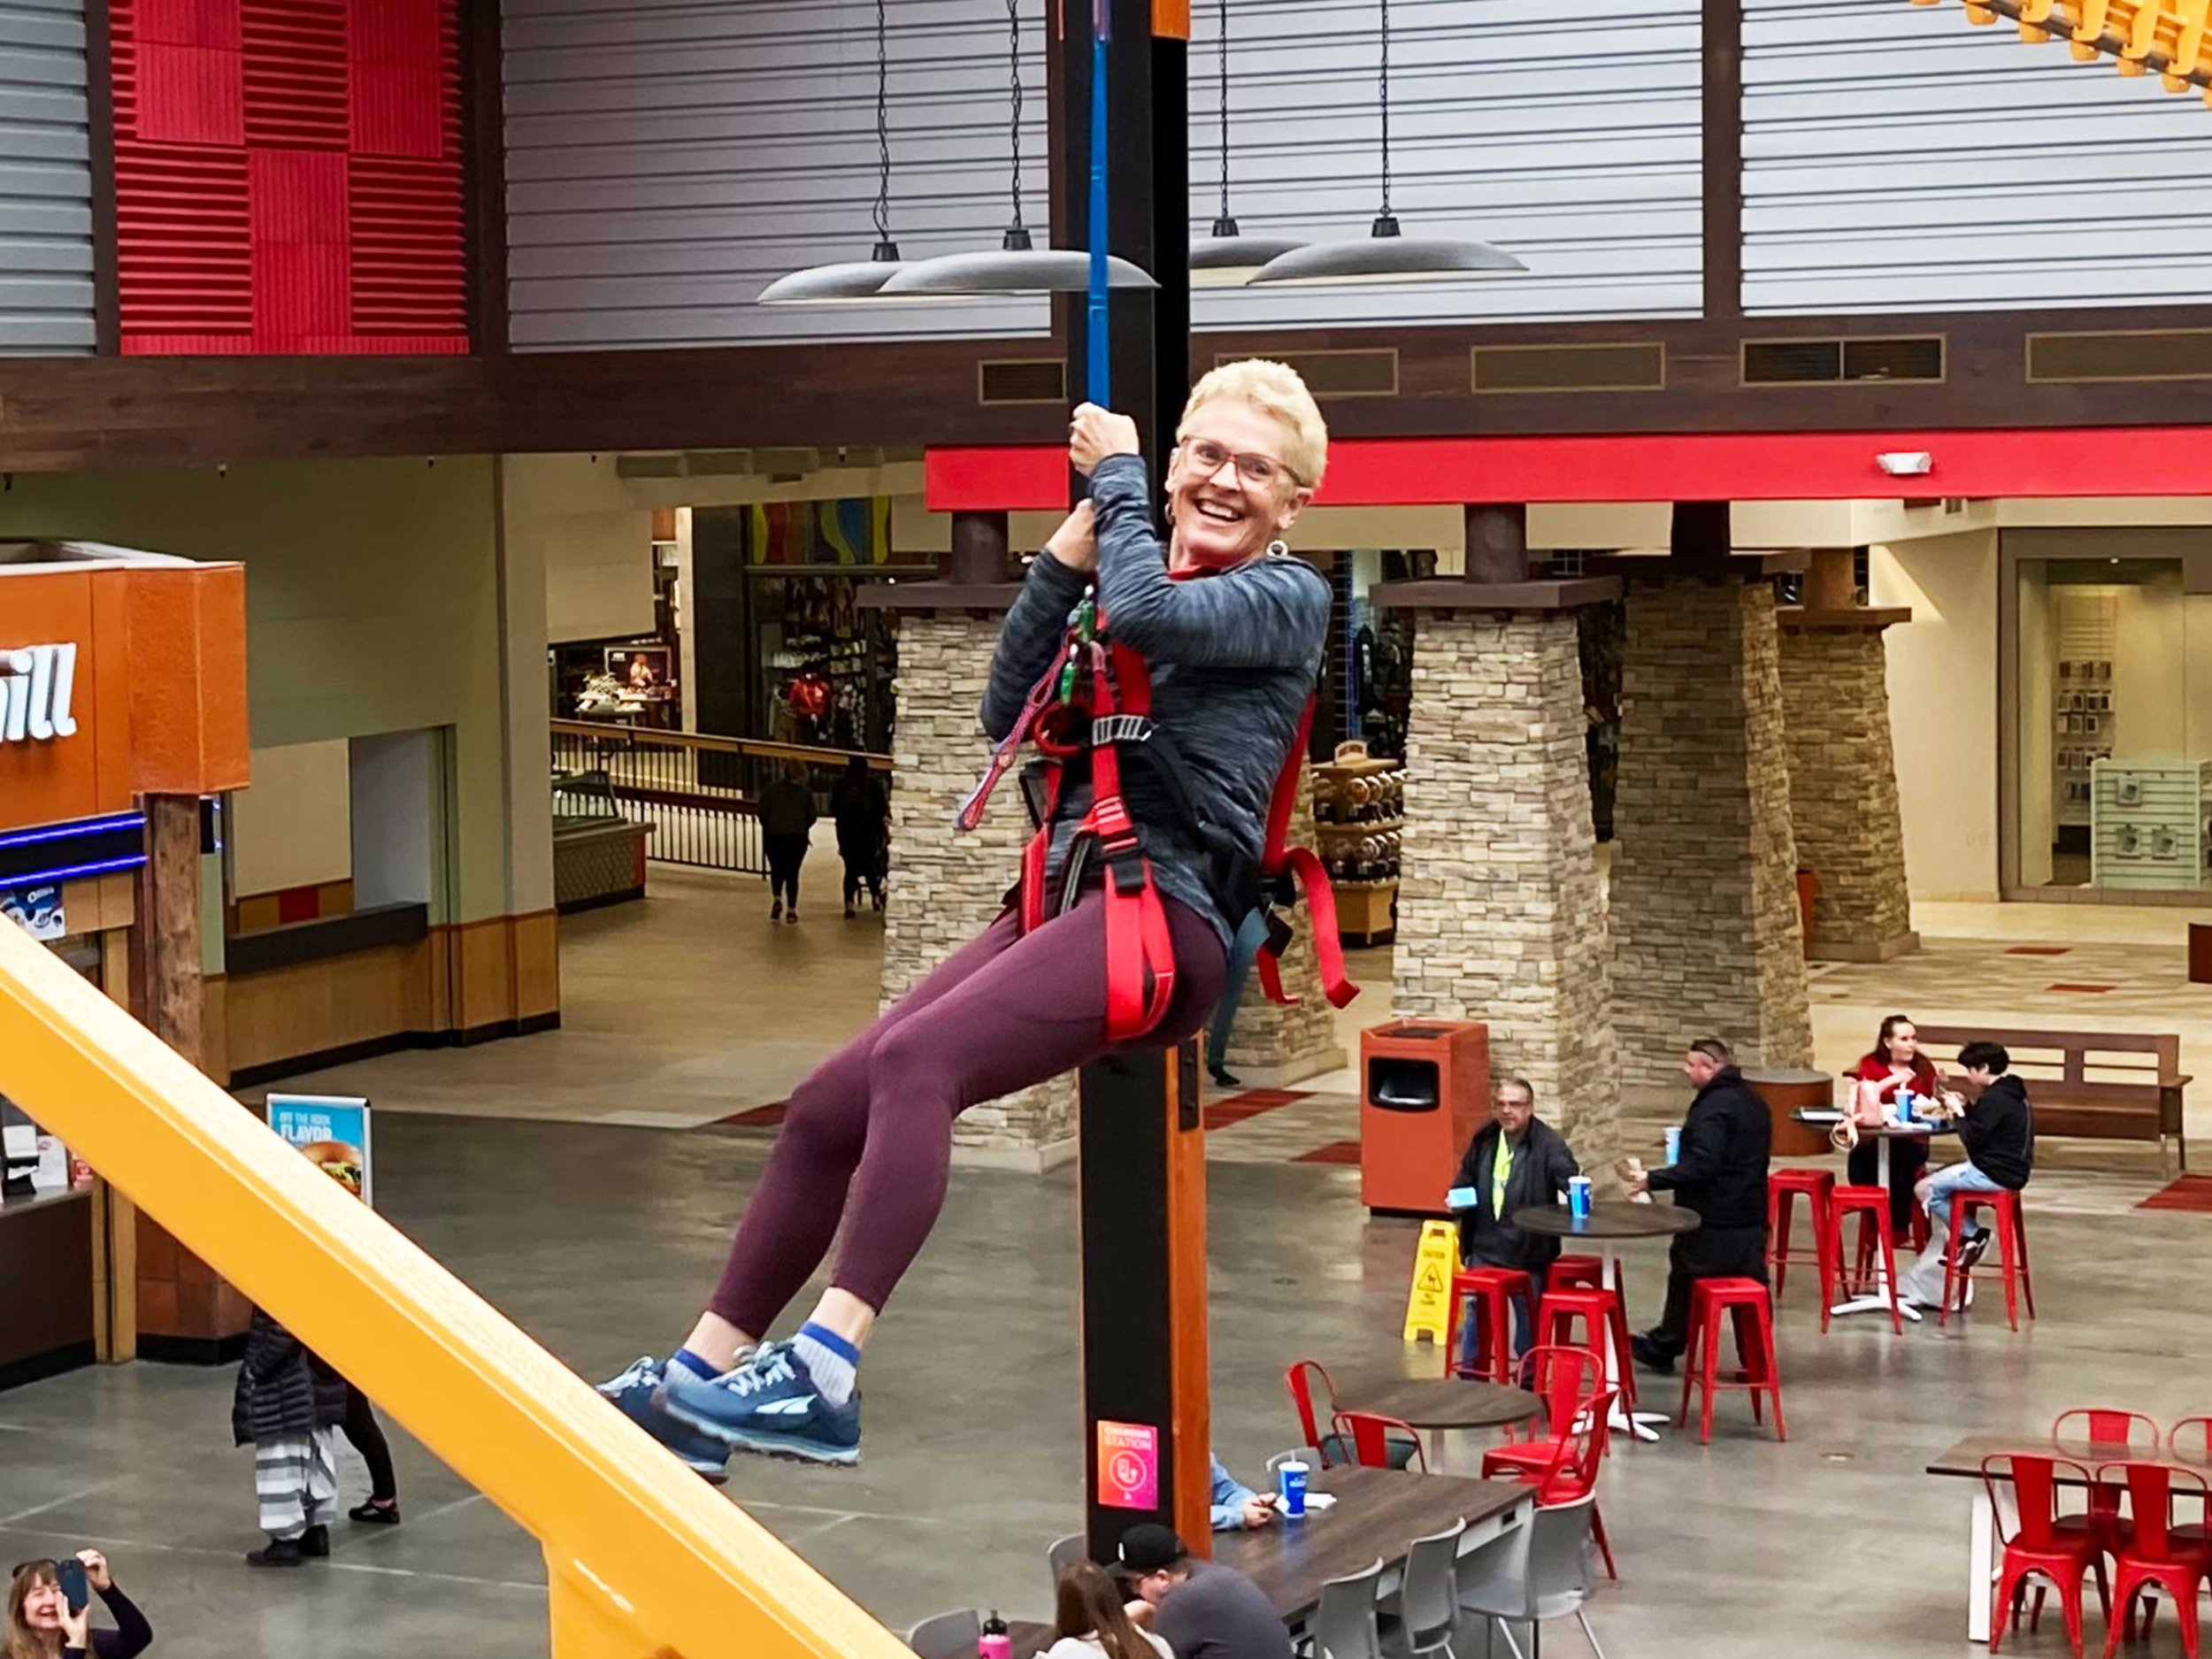 Winter Fun: Conquer Indoor Heights on Ropes Courses and Climbing